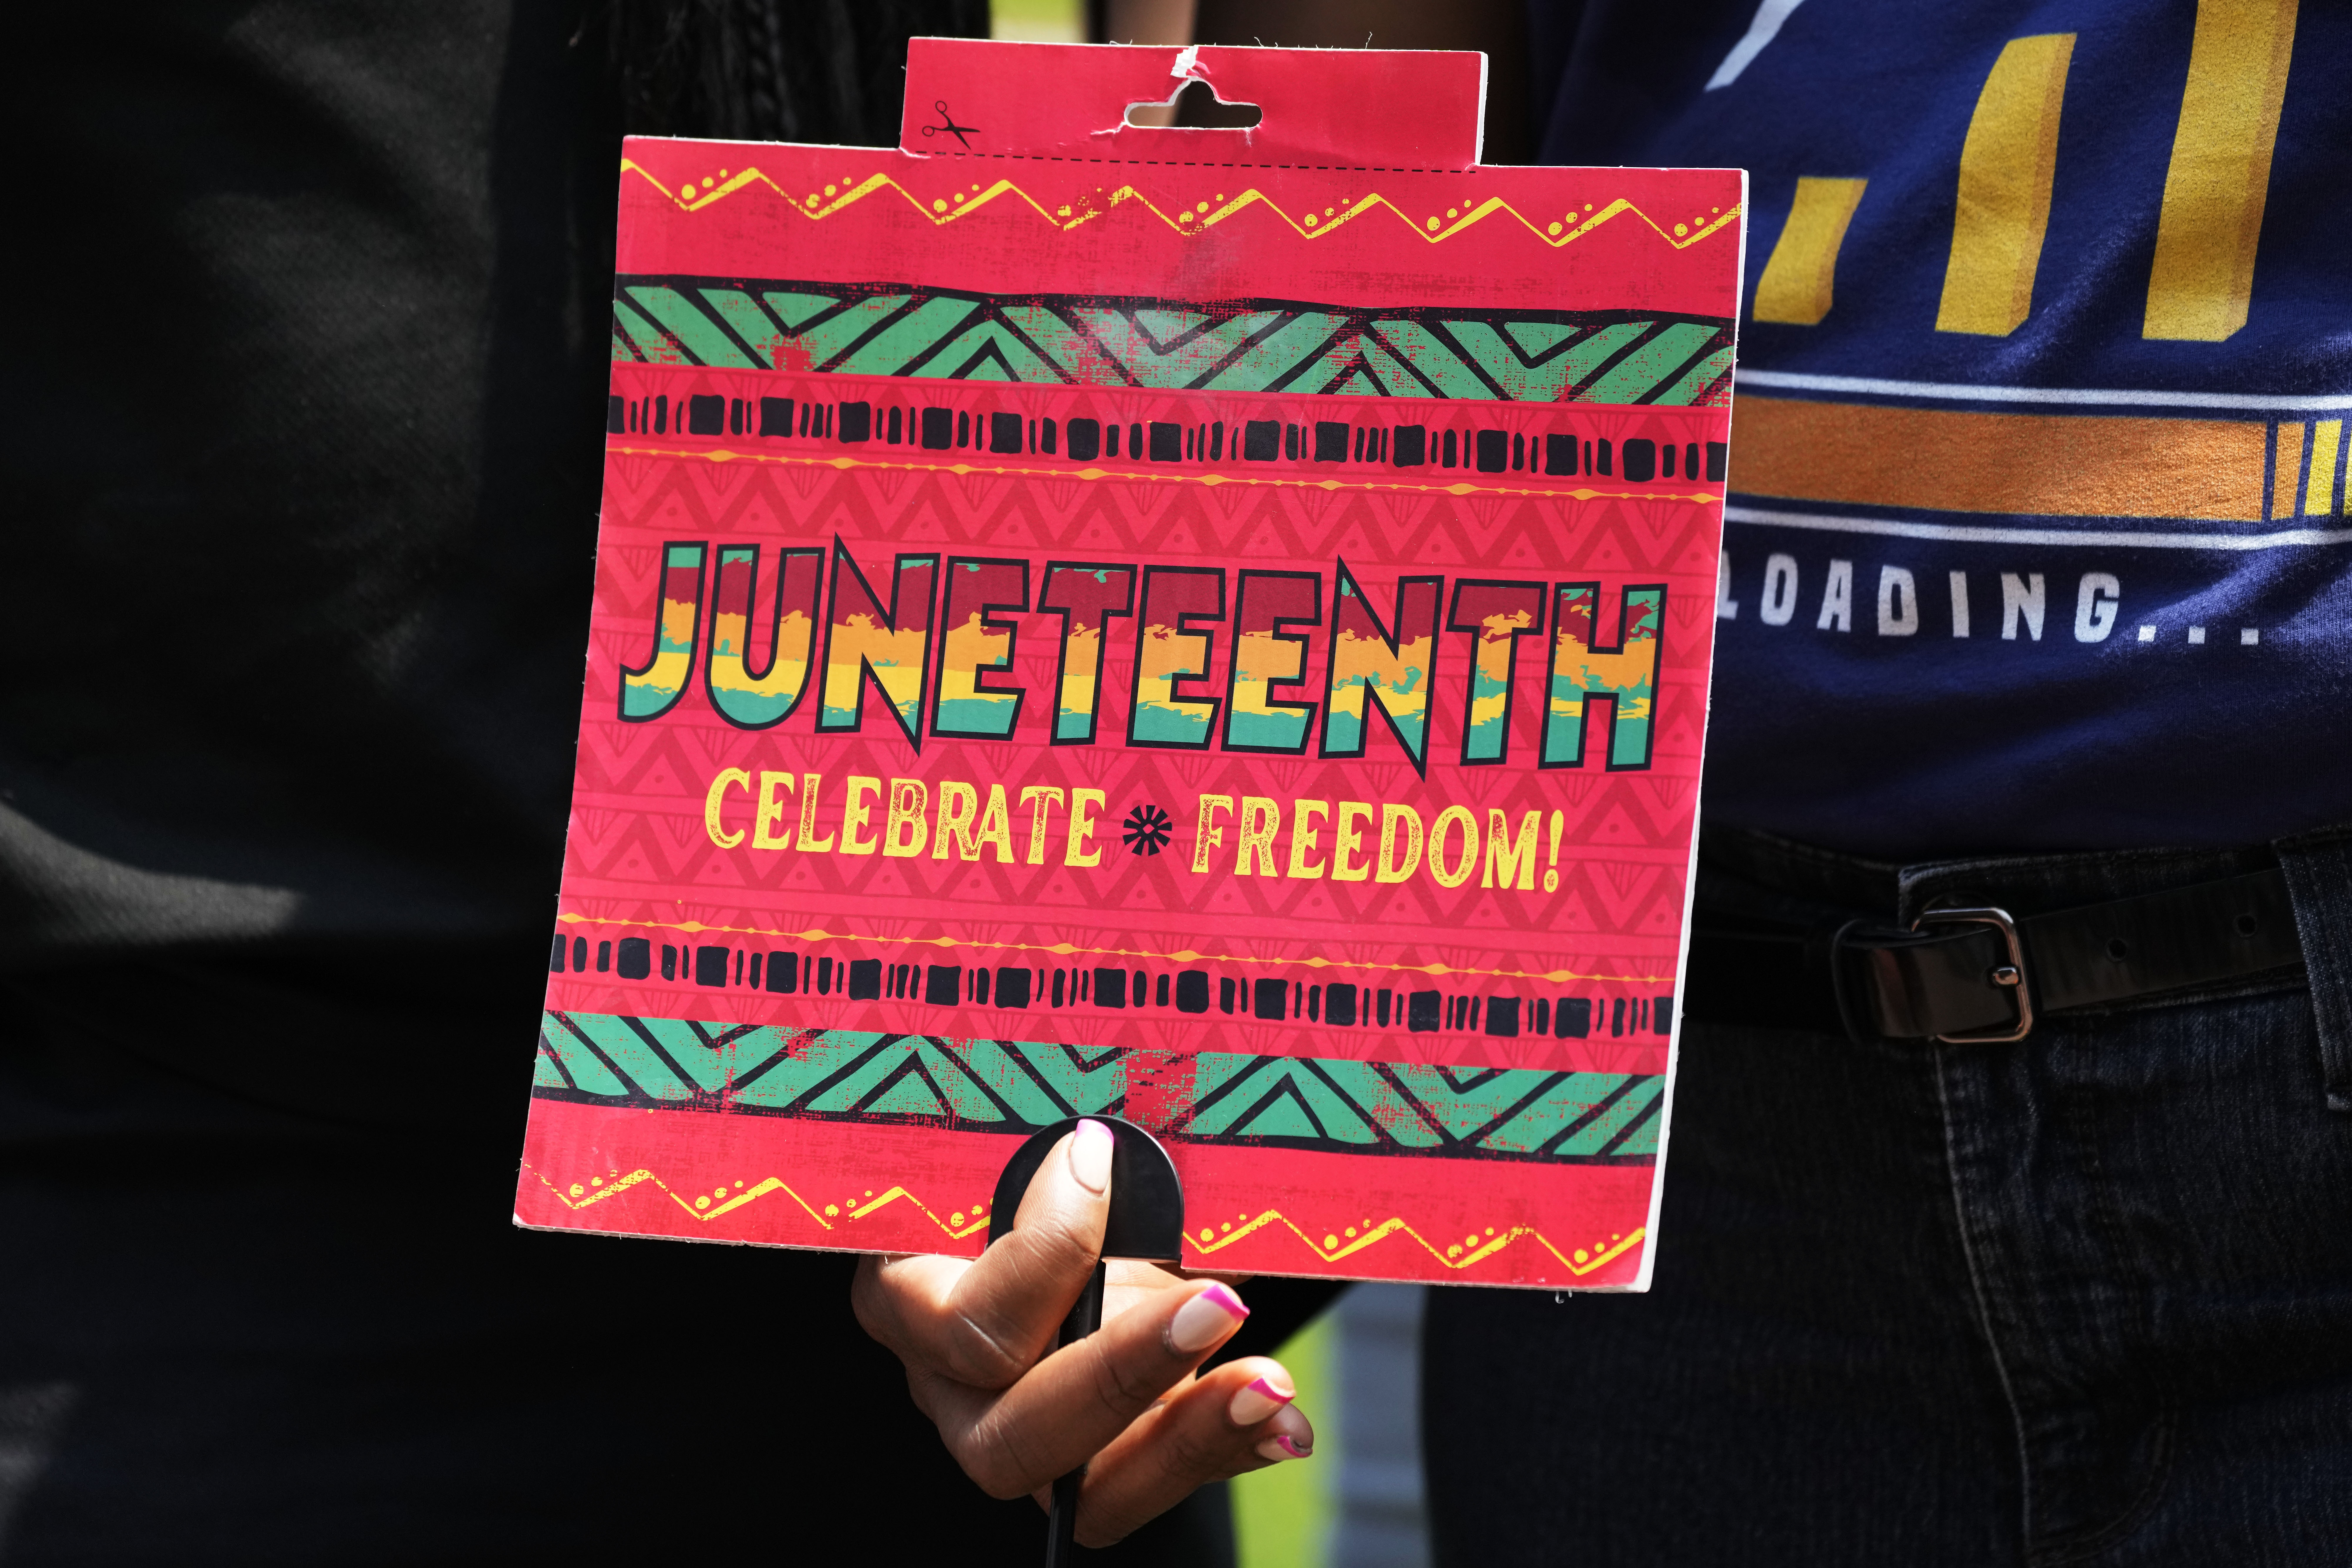 Juneteenth plays big role with MLB